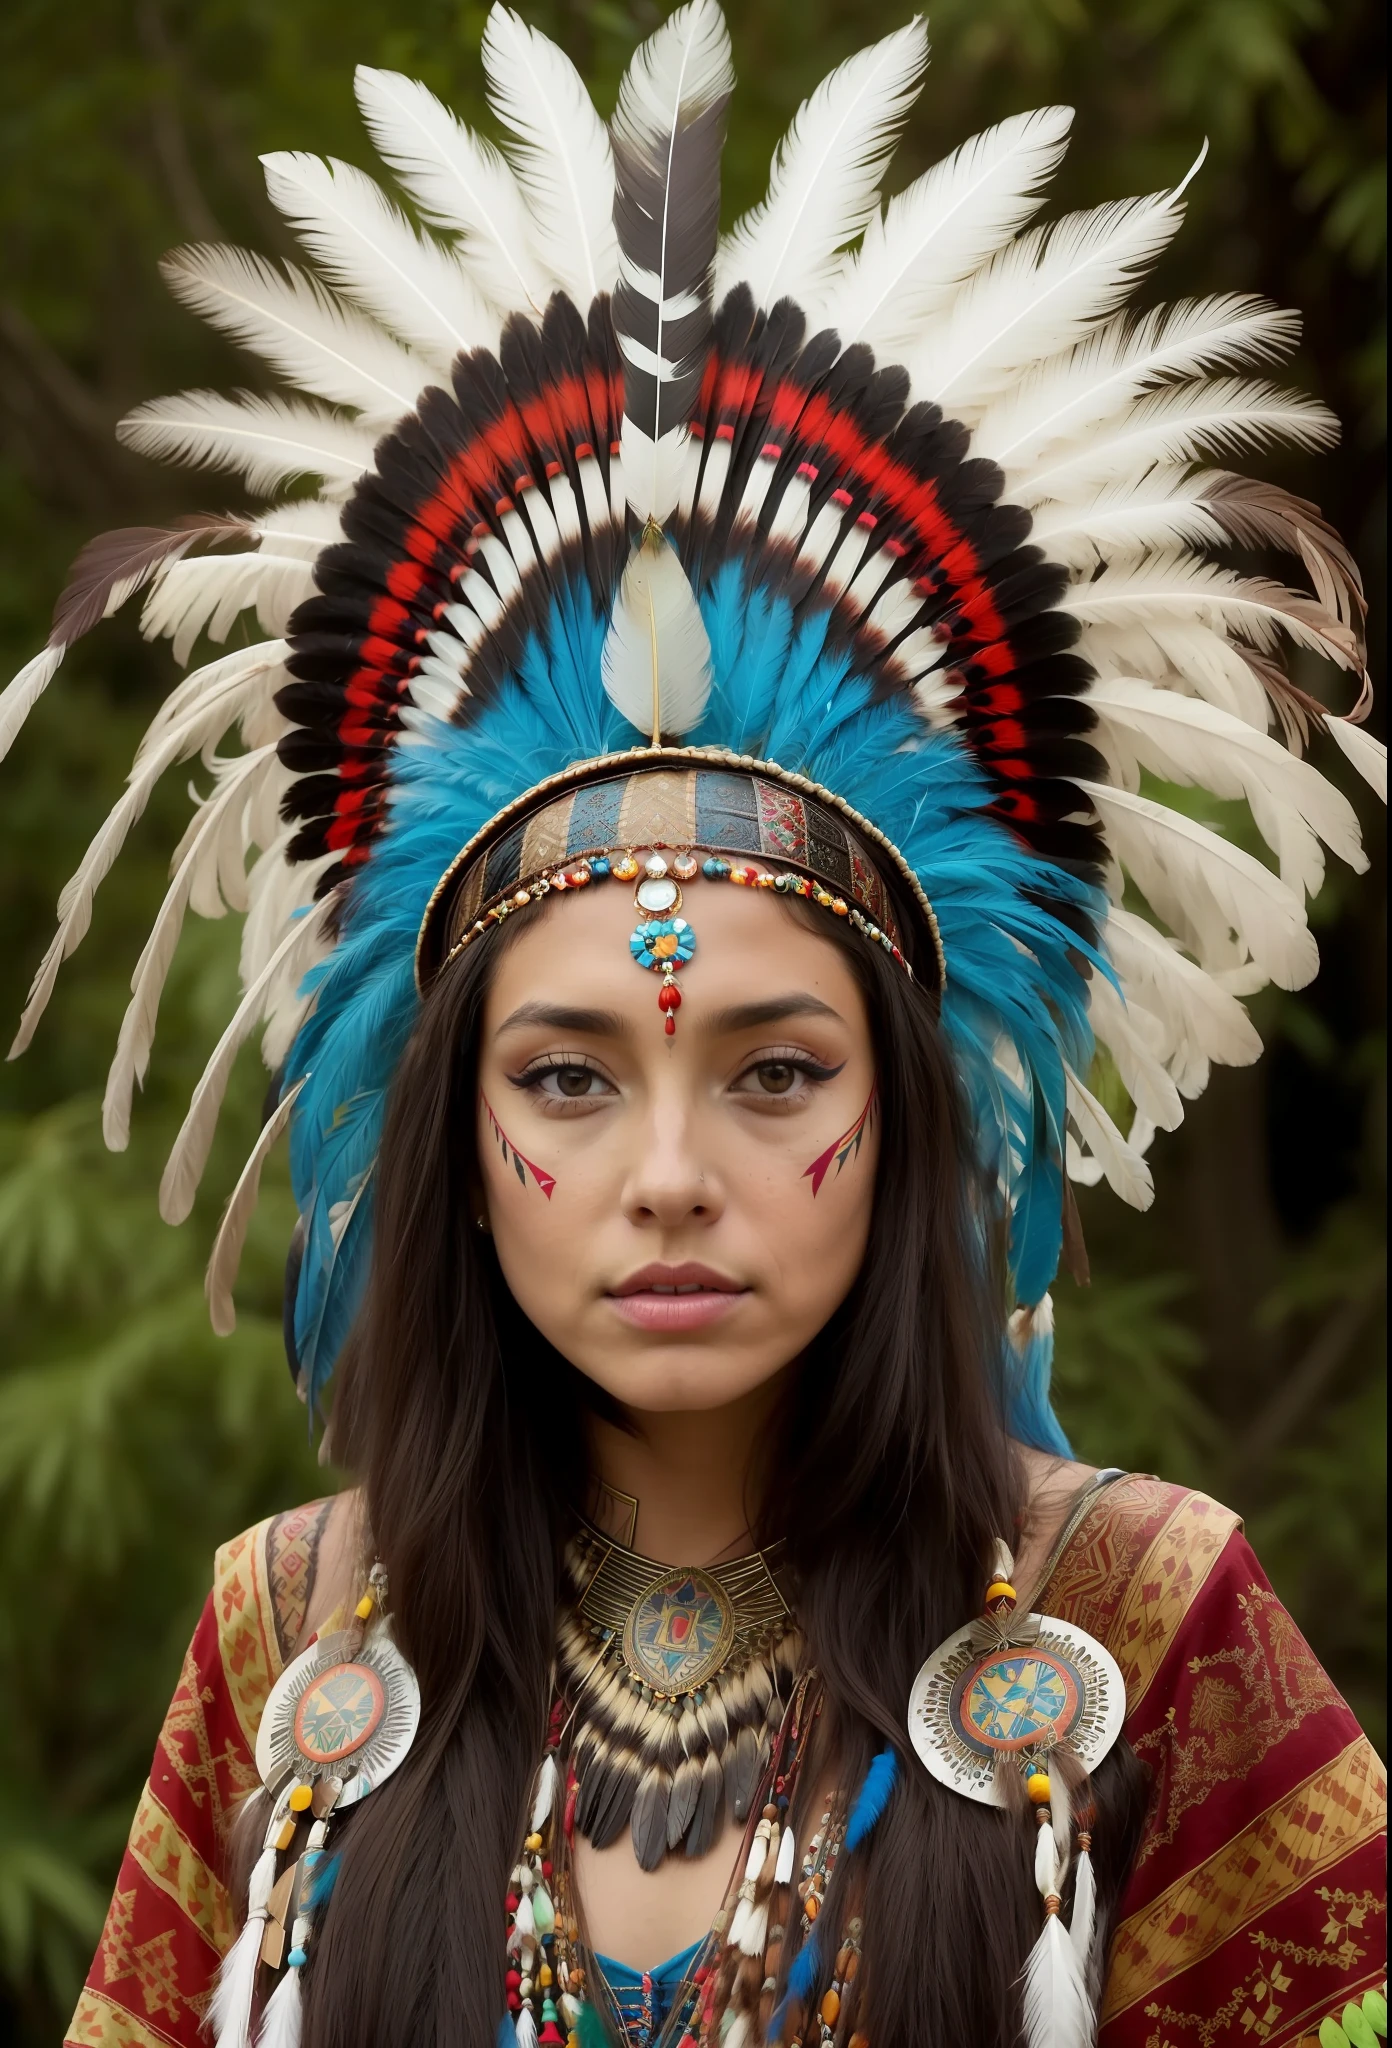 arafed woman in a feather headdress with feathers on her head,(((painted face))), aztec princess portrait, wearing crown of bright feathers, girl with feathers, beautiful young female shaman,painted face, she is dressed in shaman clothes, feathered headdress,sternum tattoo, ornate headdress, a young female shaman, angelina jolie uhd, headdress, : native american shamen fantasy, centered headdress,painted face.